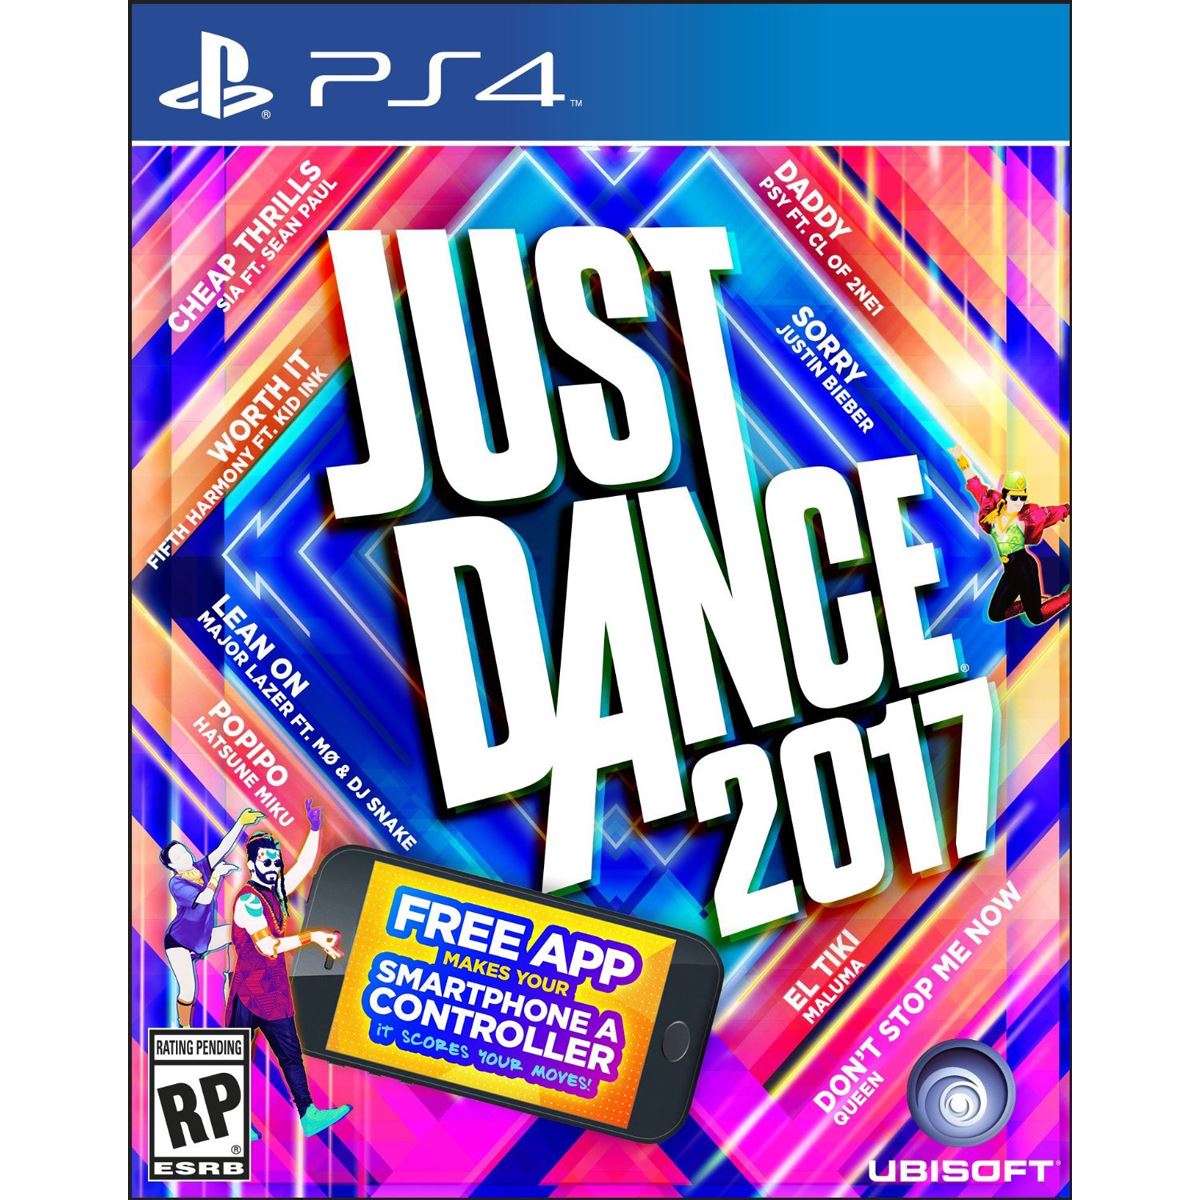 PS4 Just Dance 2017 Limited